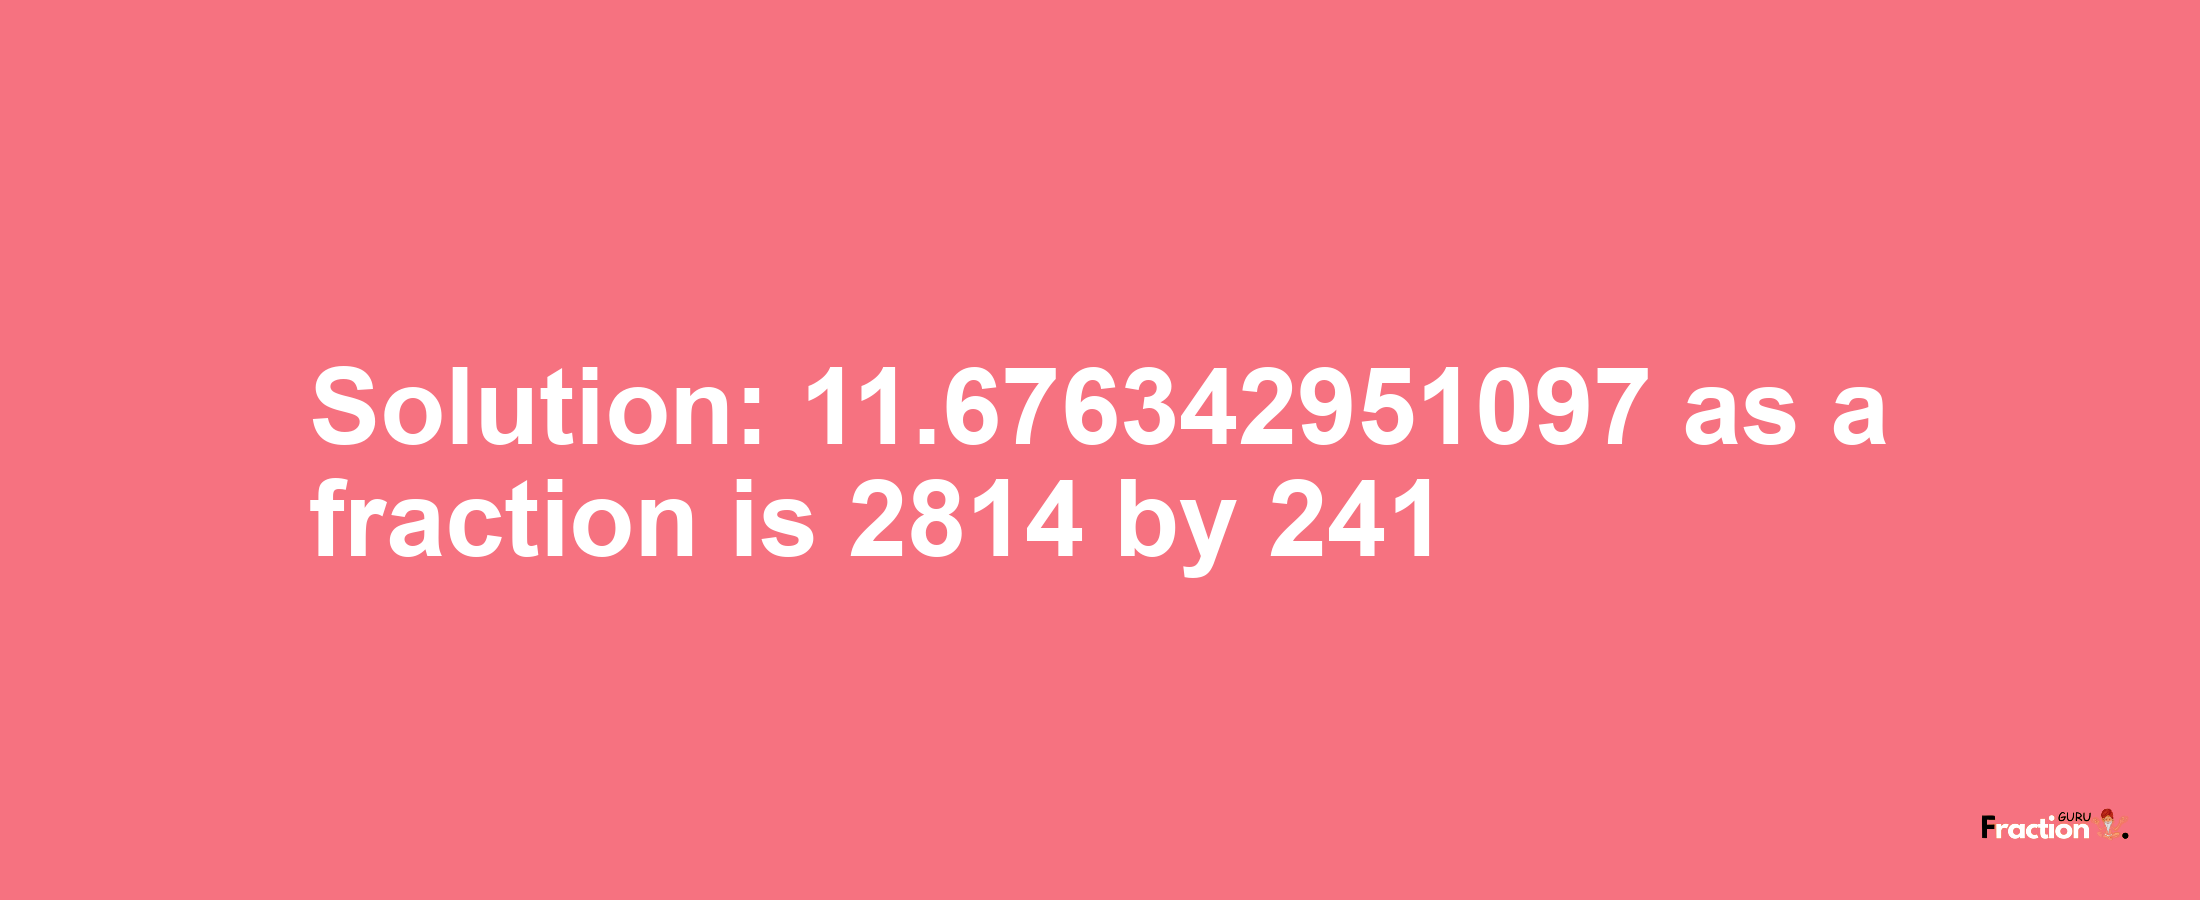 Solution:11.676342951097 as a fraction is 2814/241